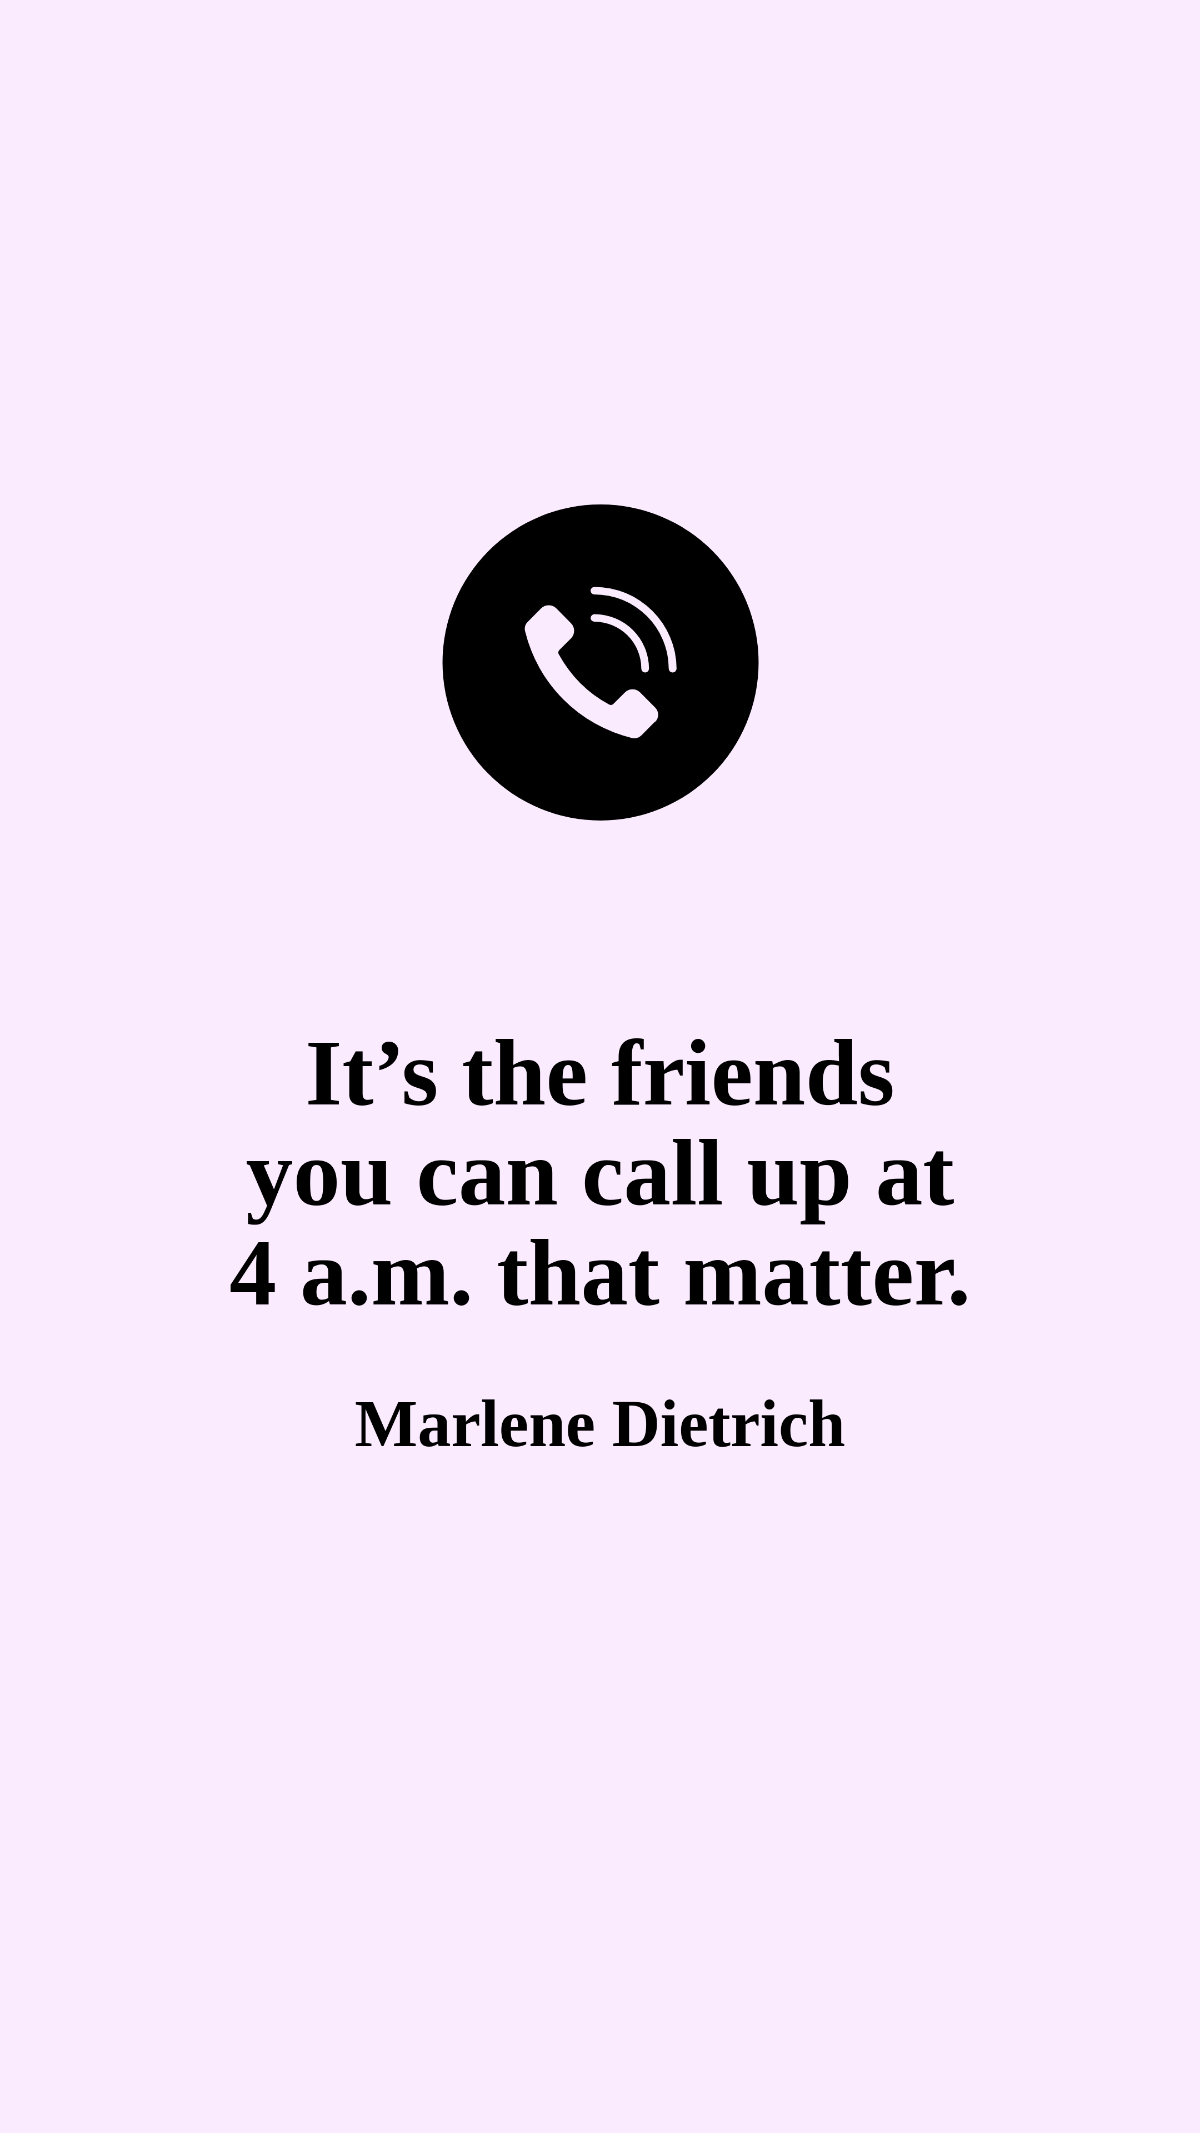 Marlene Dietrich - It’s the friends you can call up at 4 a.m. that matter. Template